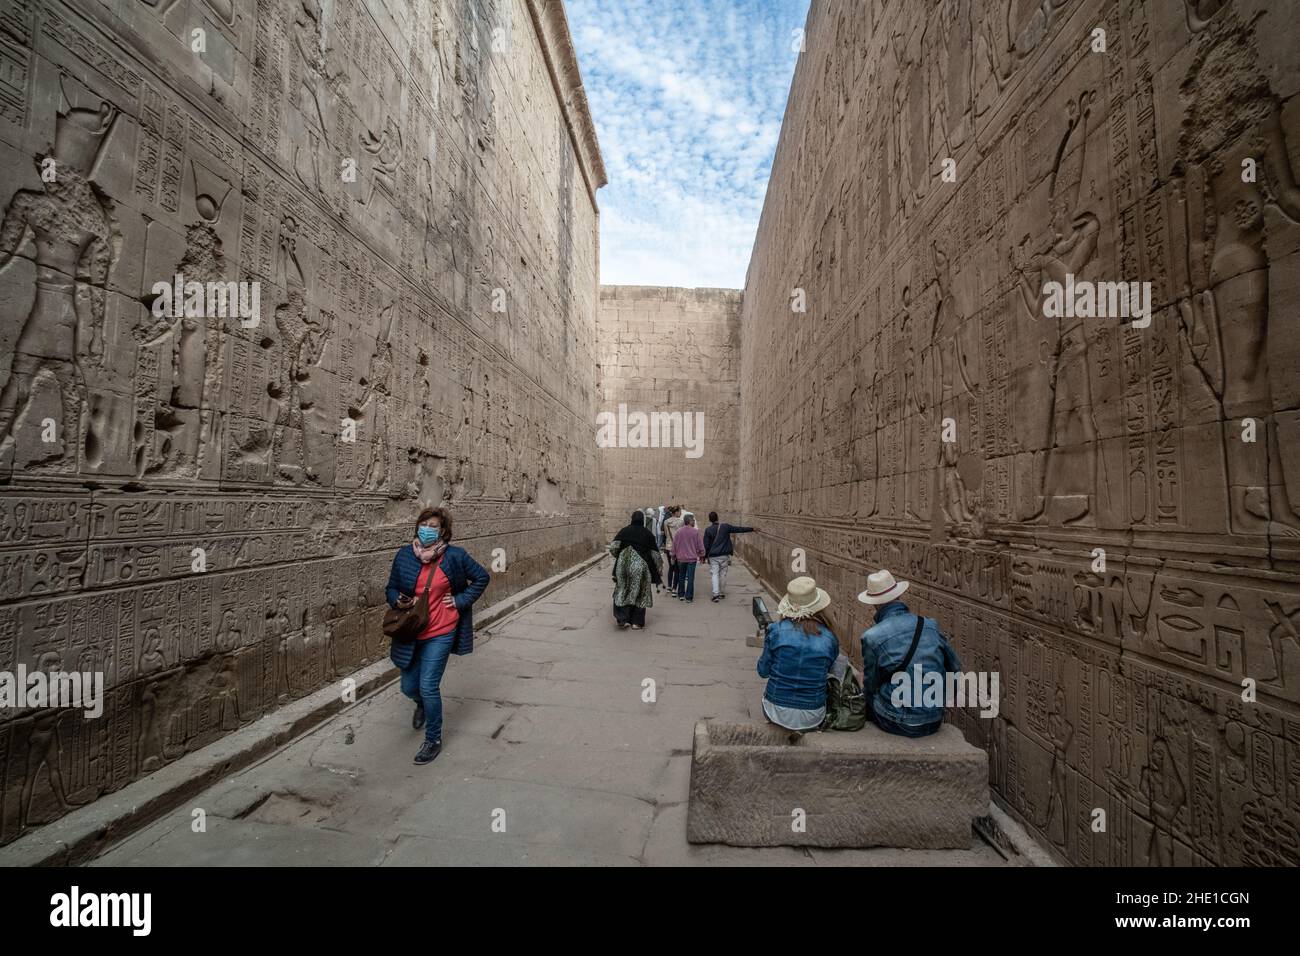 A richly inscribed and carved passageway around Edfu temple where the stone walls are densely covered with hieroglyphs and relief sculptures. Stock Photo